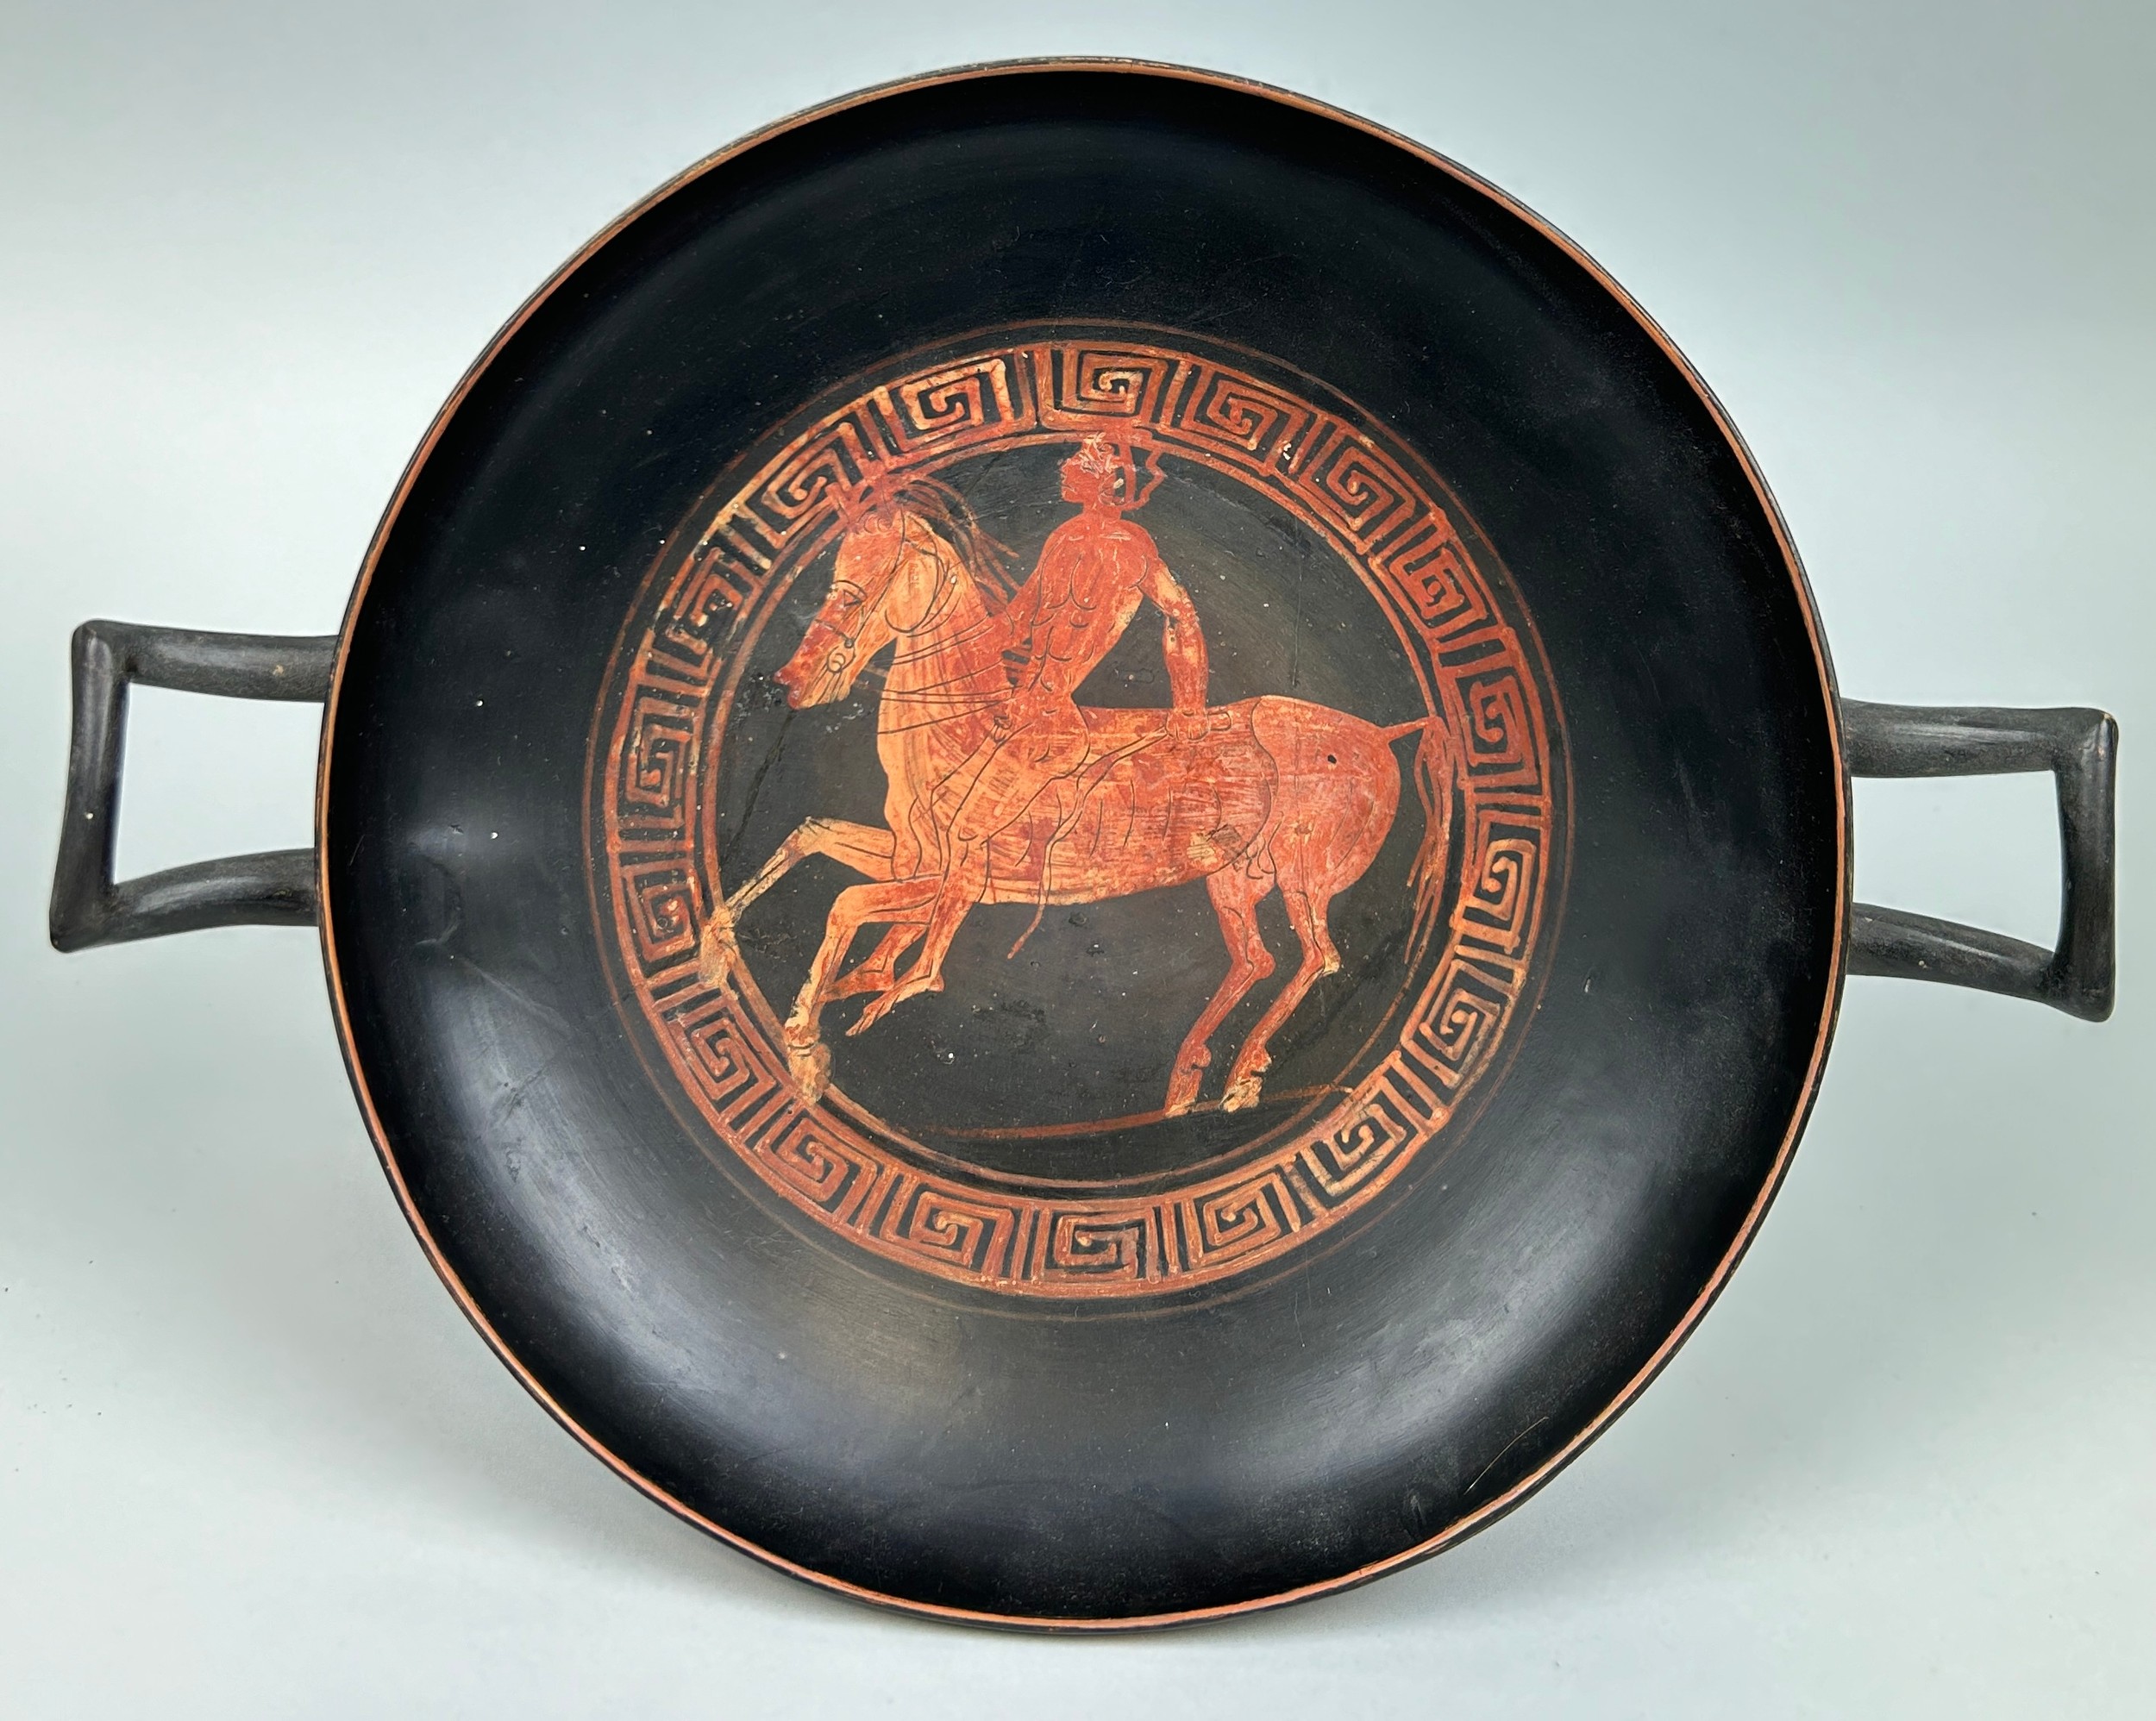 AN APULIAN POTTERY KYLIX DECORATED WITH A HORSE AND RIDER CIRCA 5TH CENTURY B.C. - Image 10 of 10